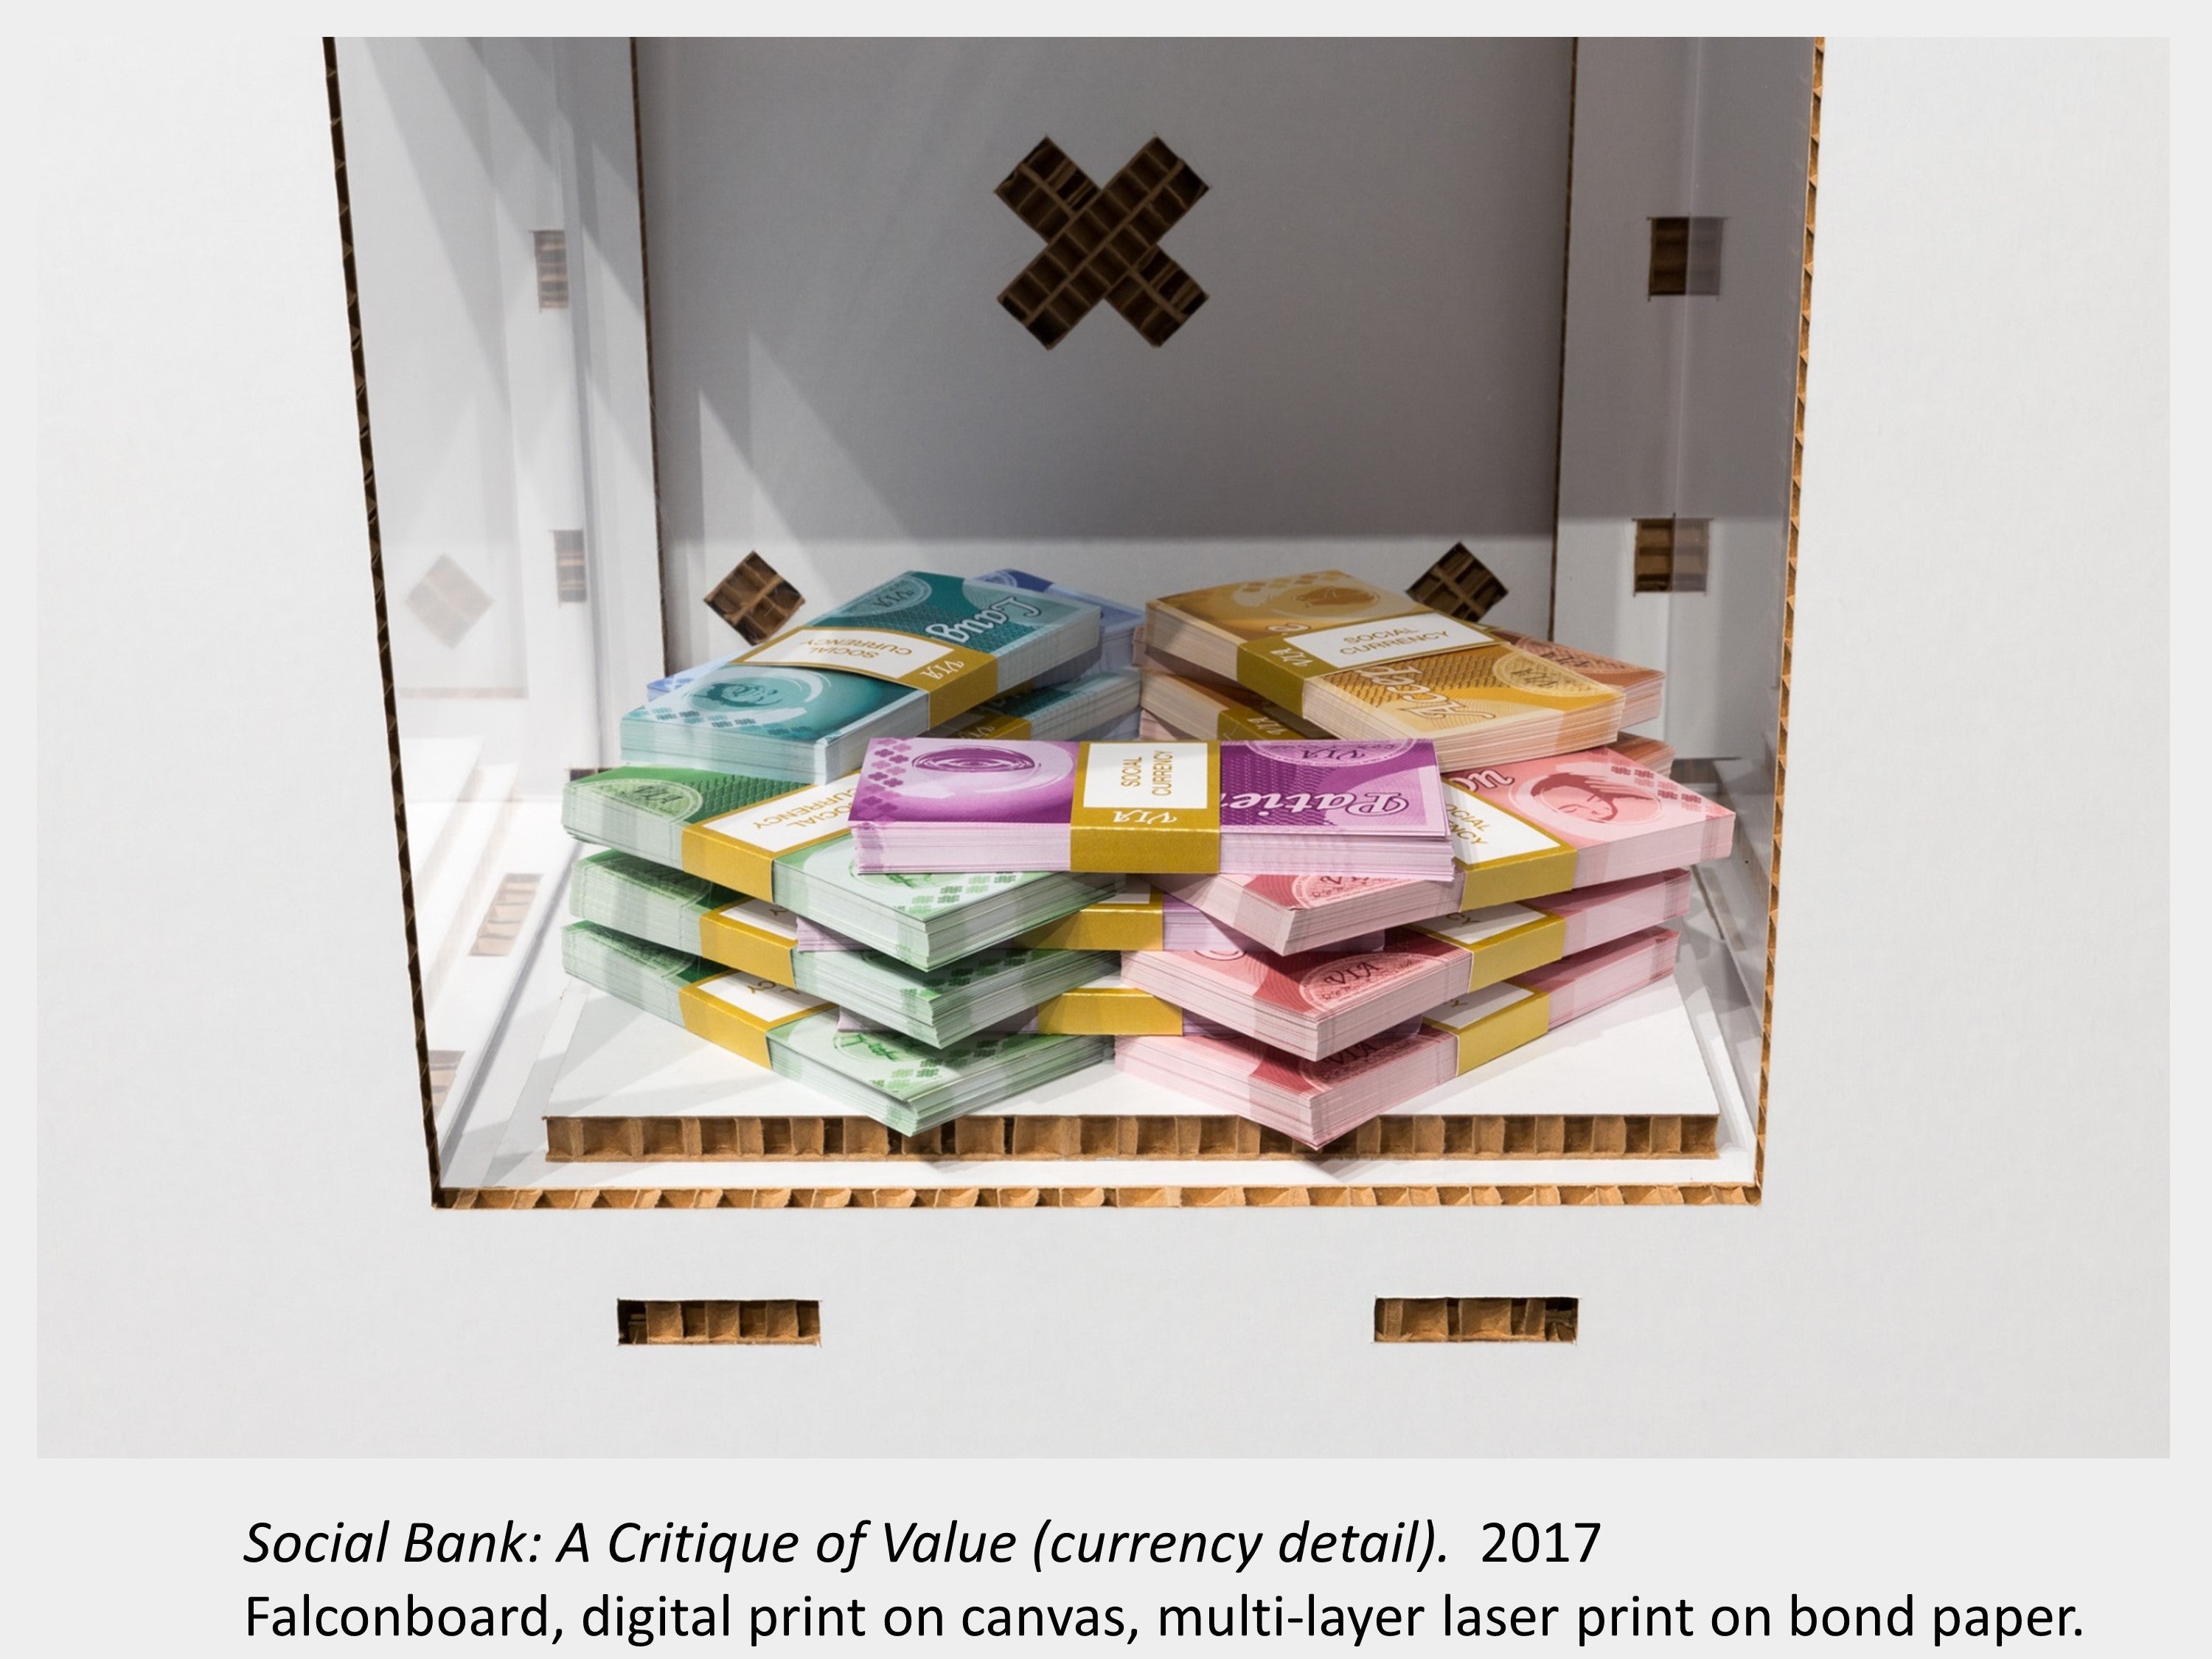 Artwork by Denise St Marie and Timothy Walker, Social Bank: A Critique of Value, 2017, Falconboard, laser print on paper